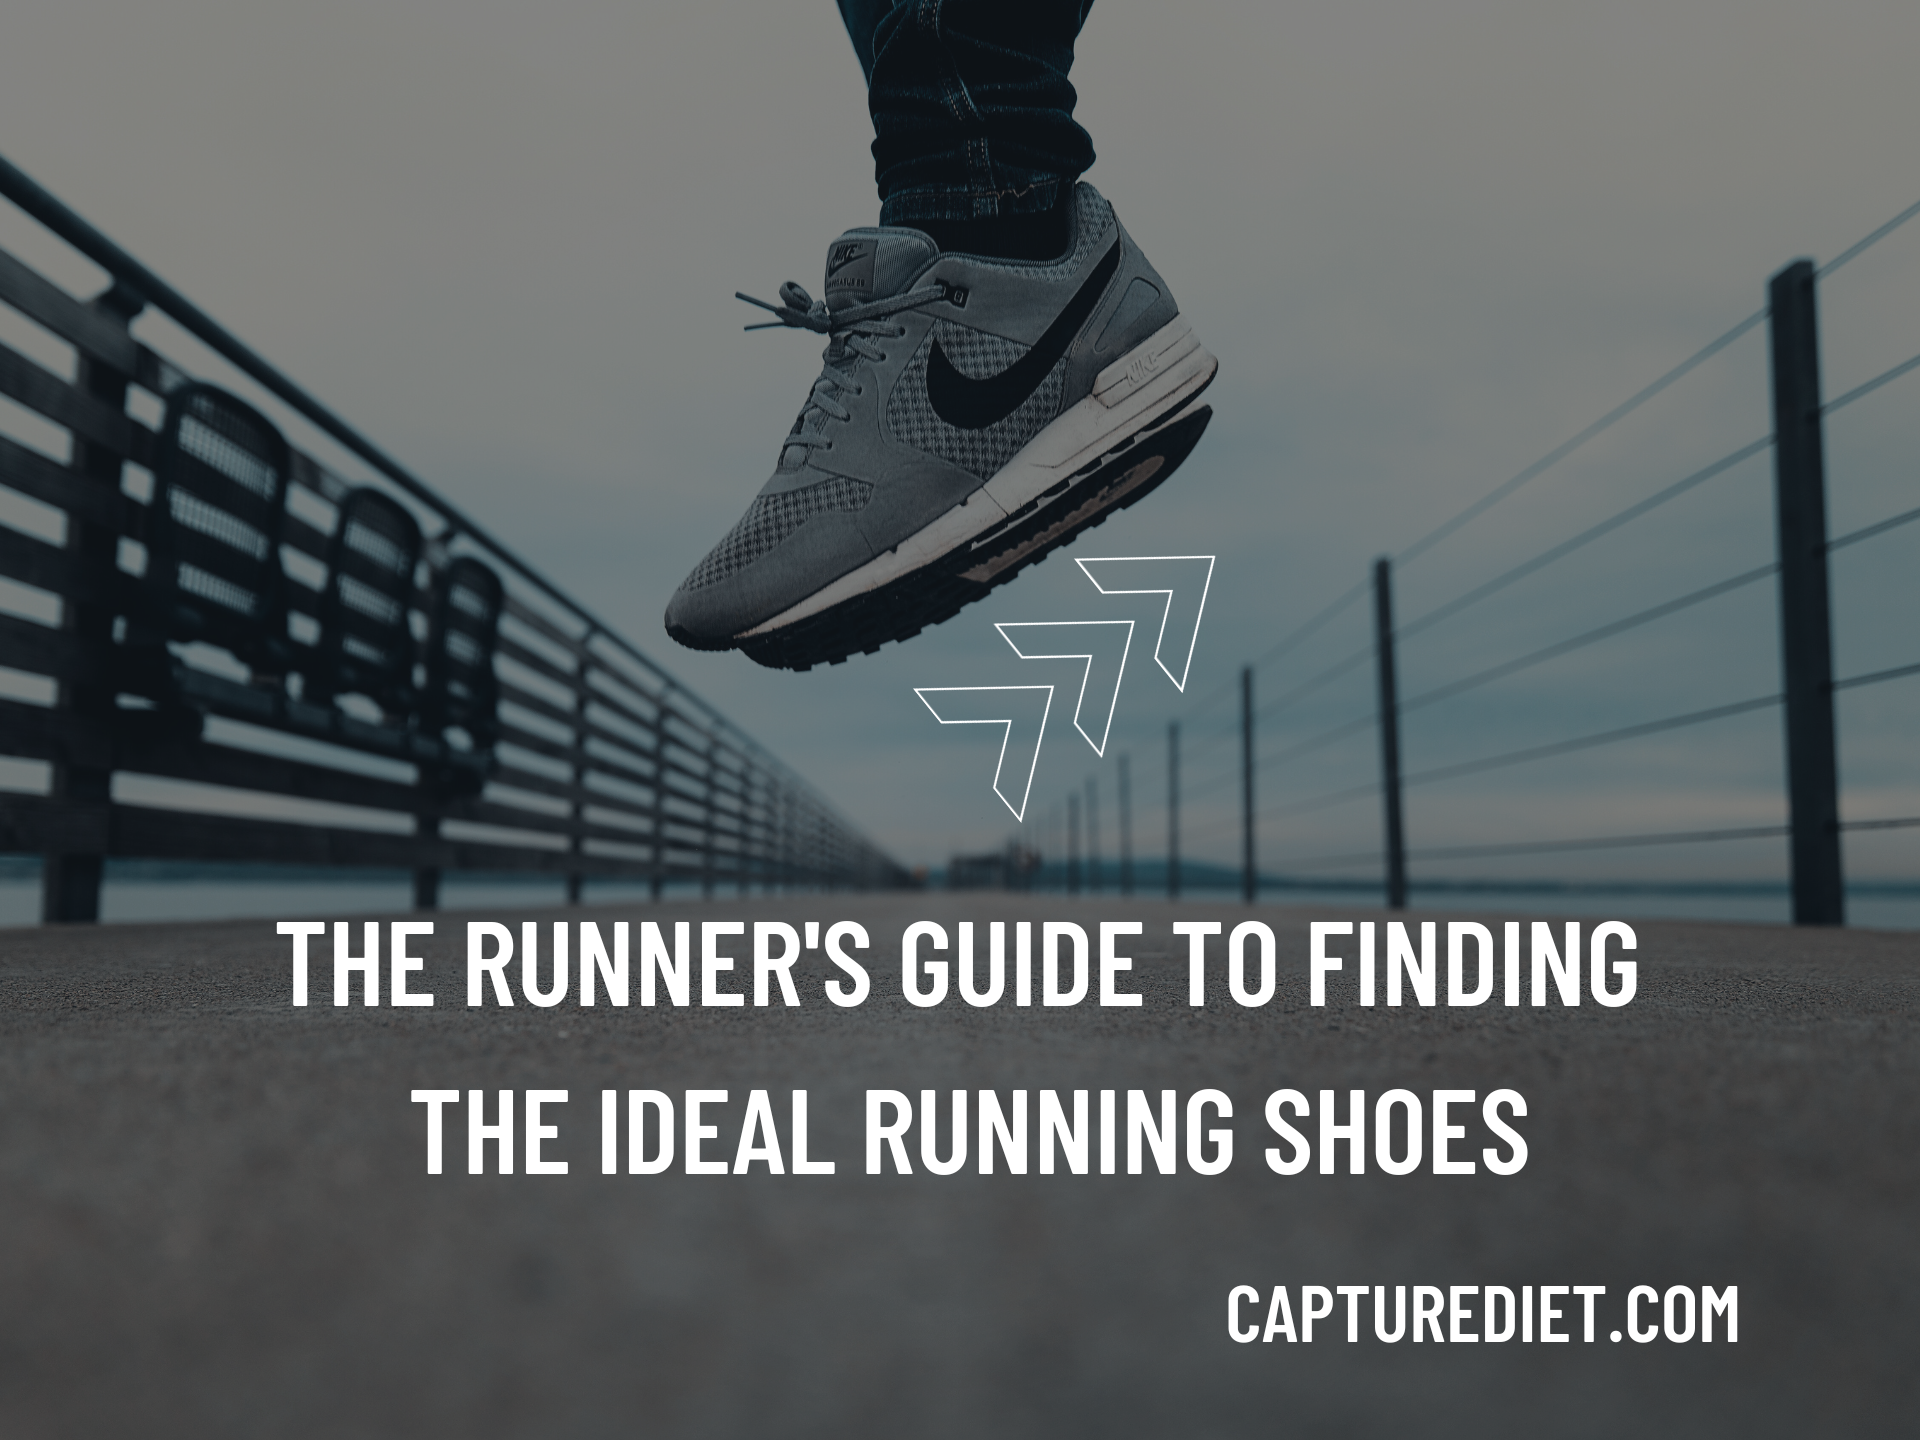 The Runner's Guide to Finding the Ideal Running Shoes